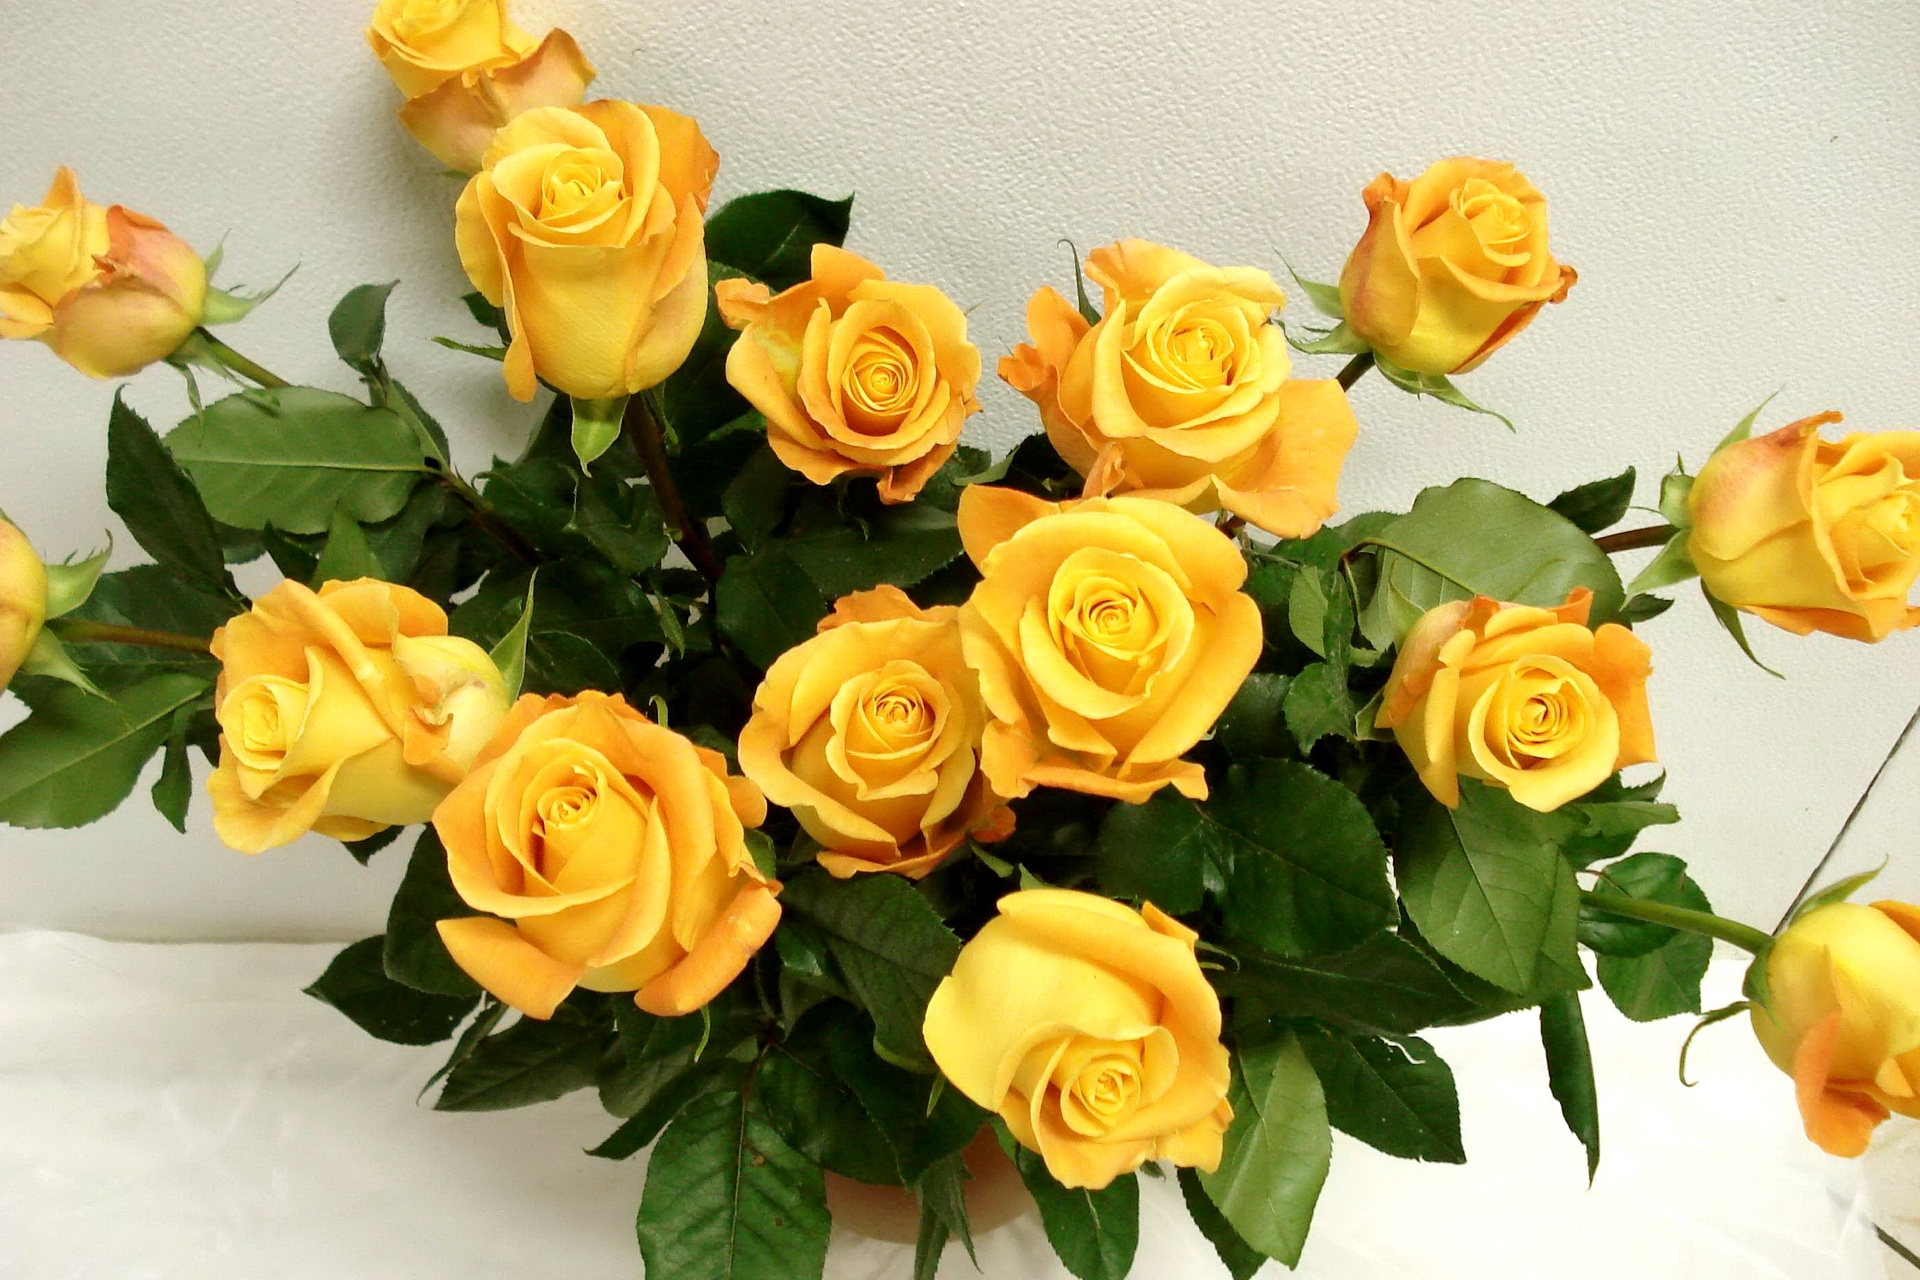 bouquet, roses, flowers, yellow, vase, gorgeous, chic